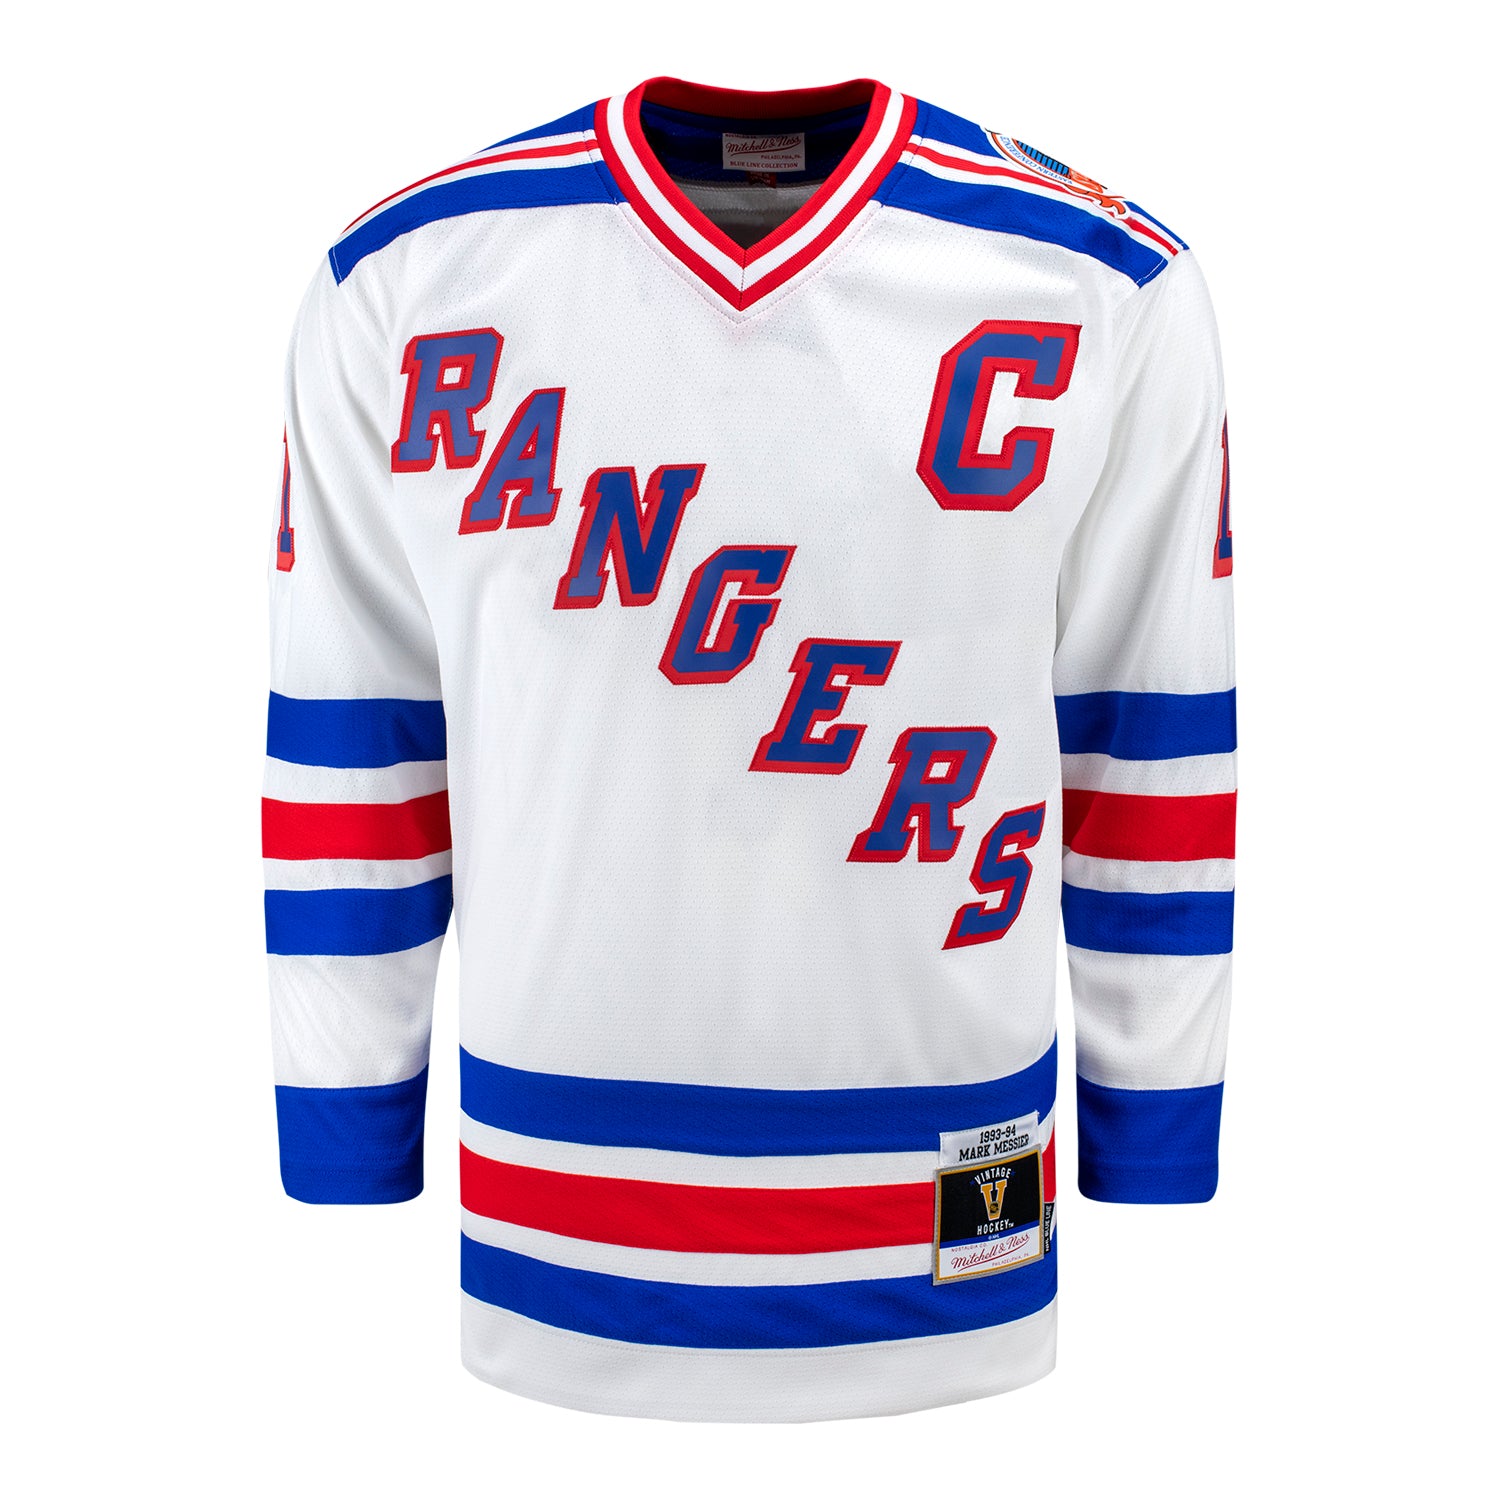 Authentic 1994 Mark Messier #11 NY Rangers Jersey - Mitchell & Ness - XL -  (NWT)